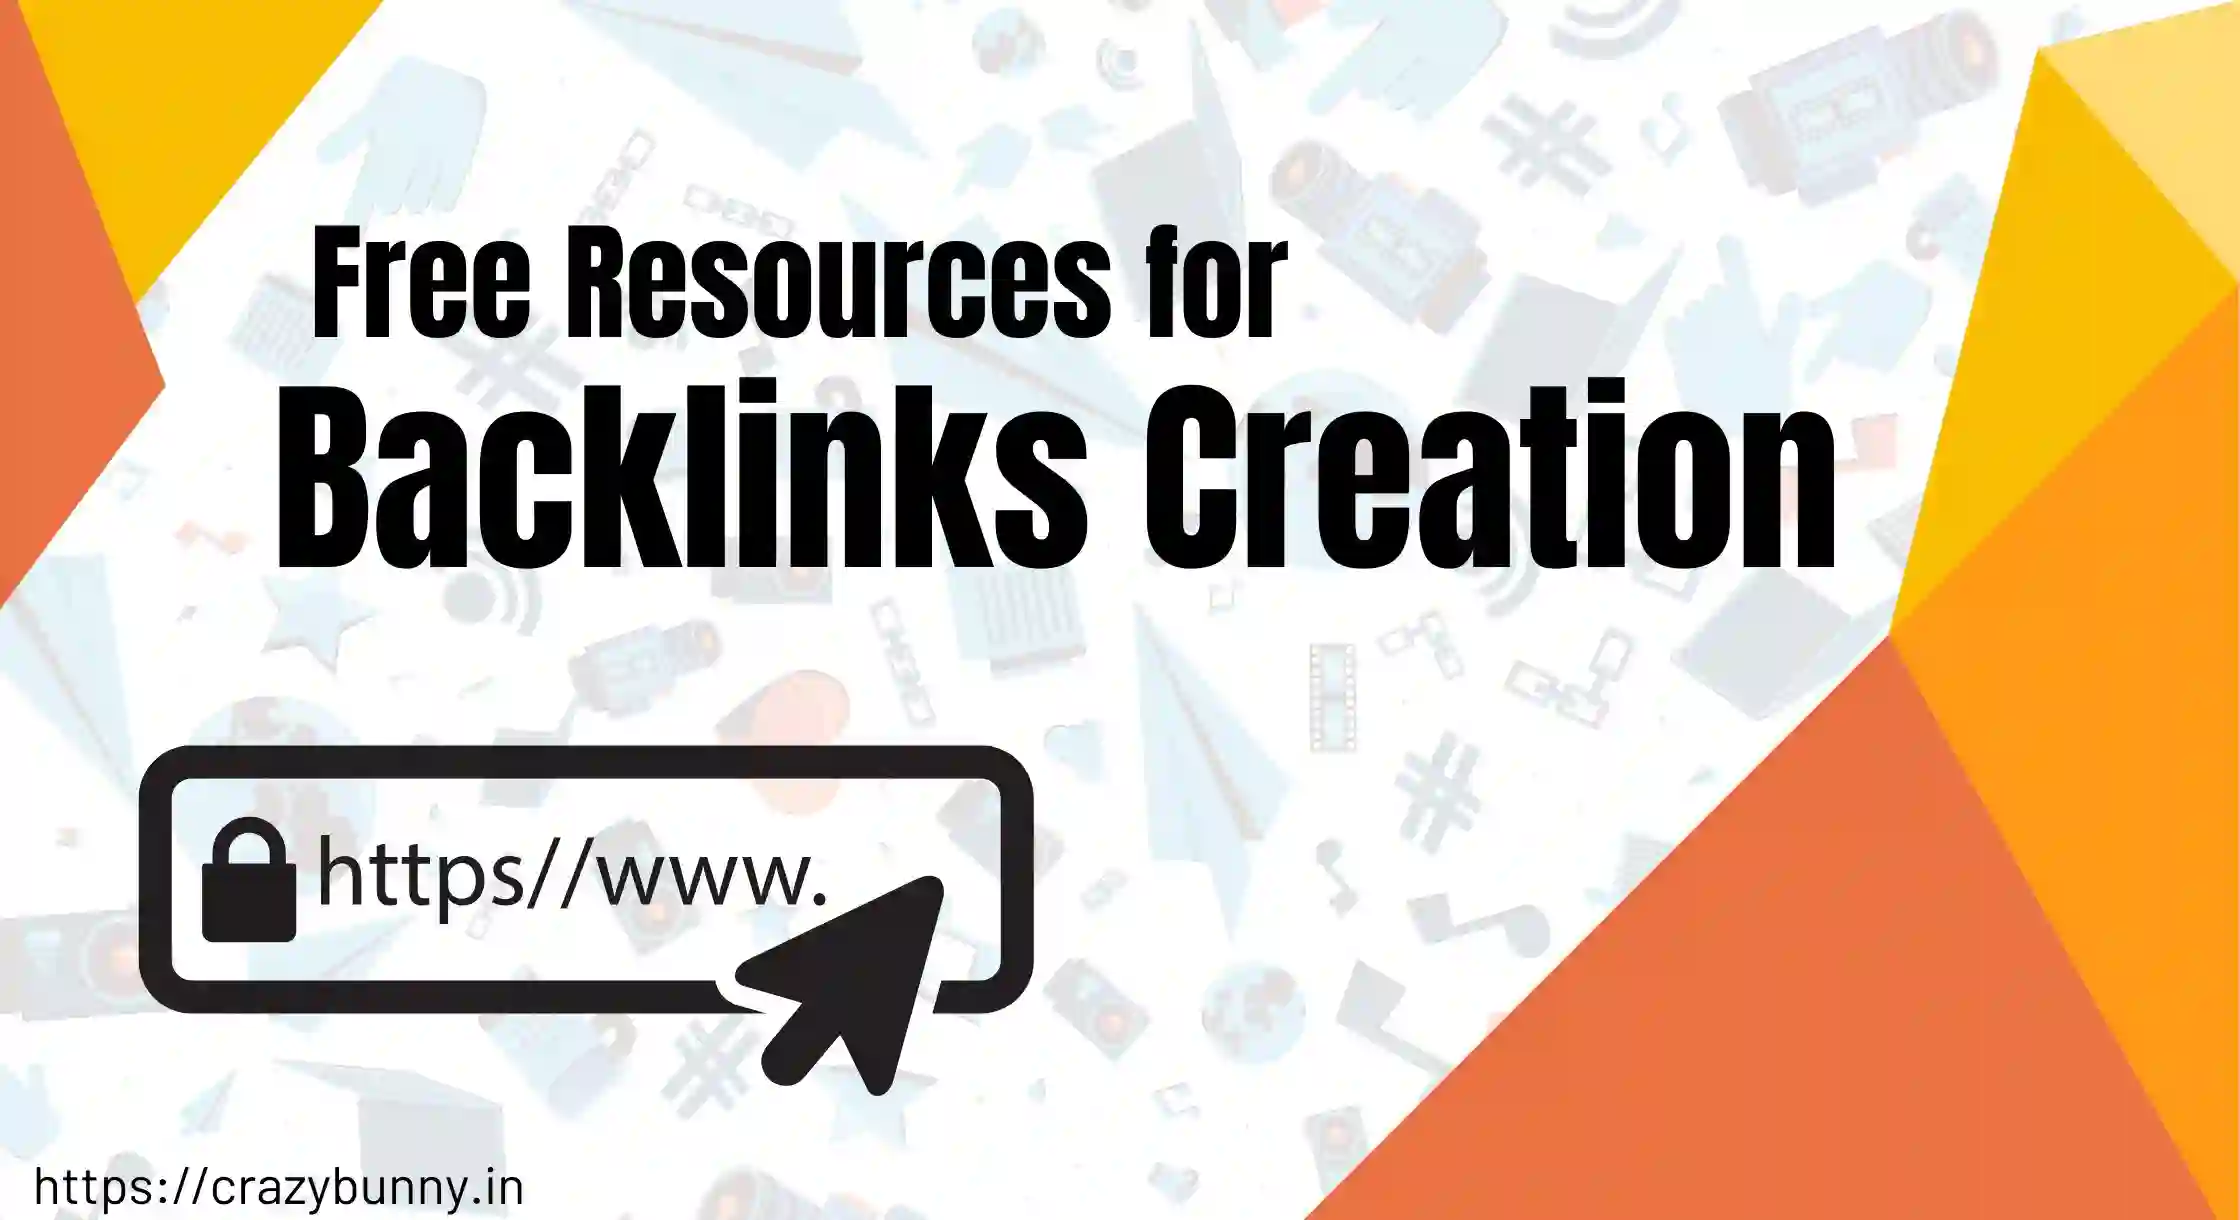 Free Resources for Backlinks creation